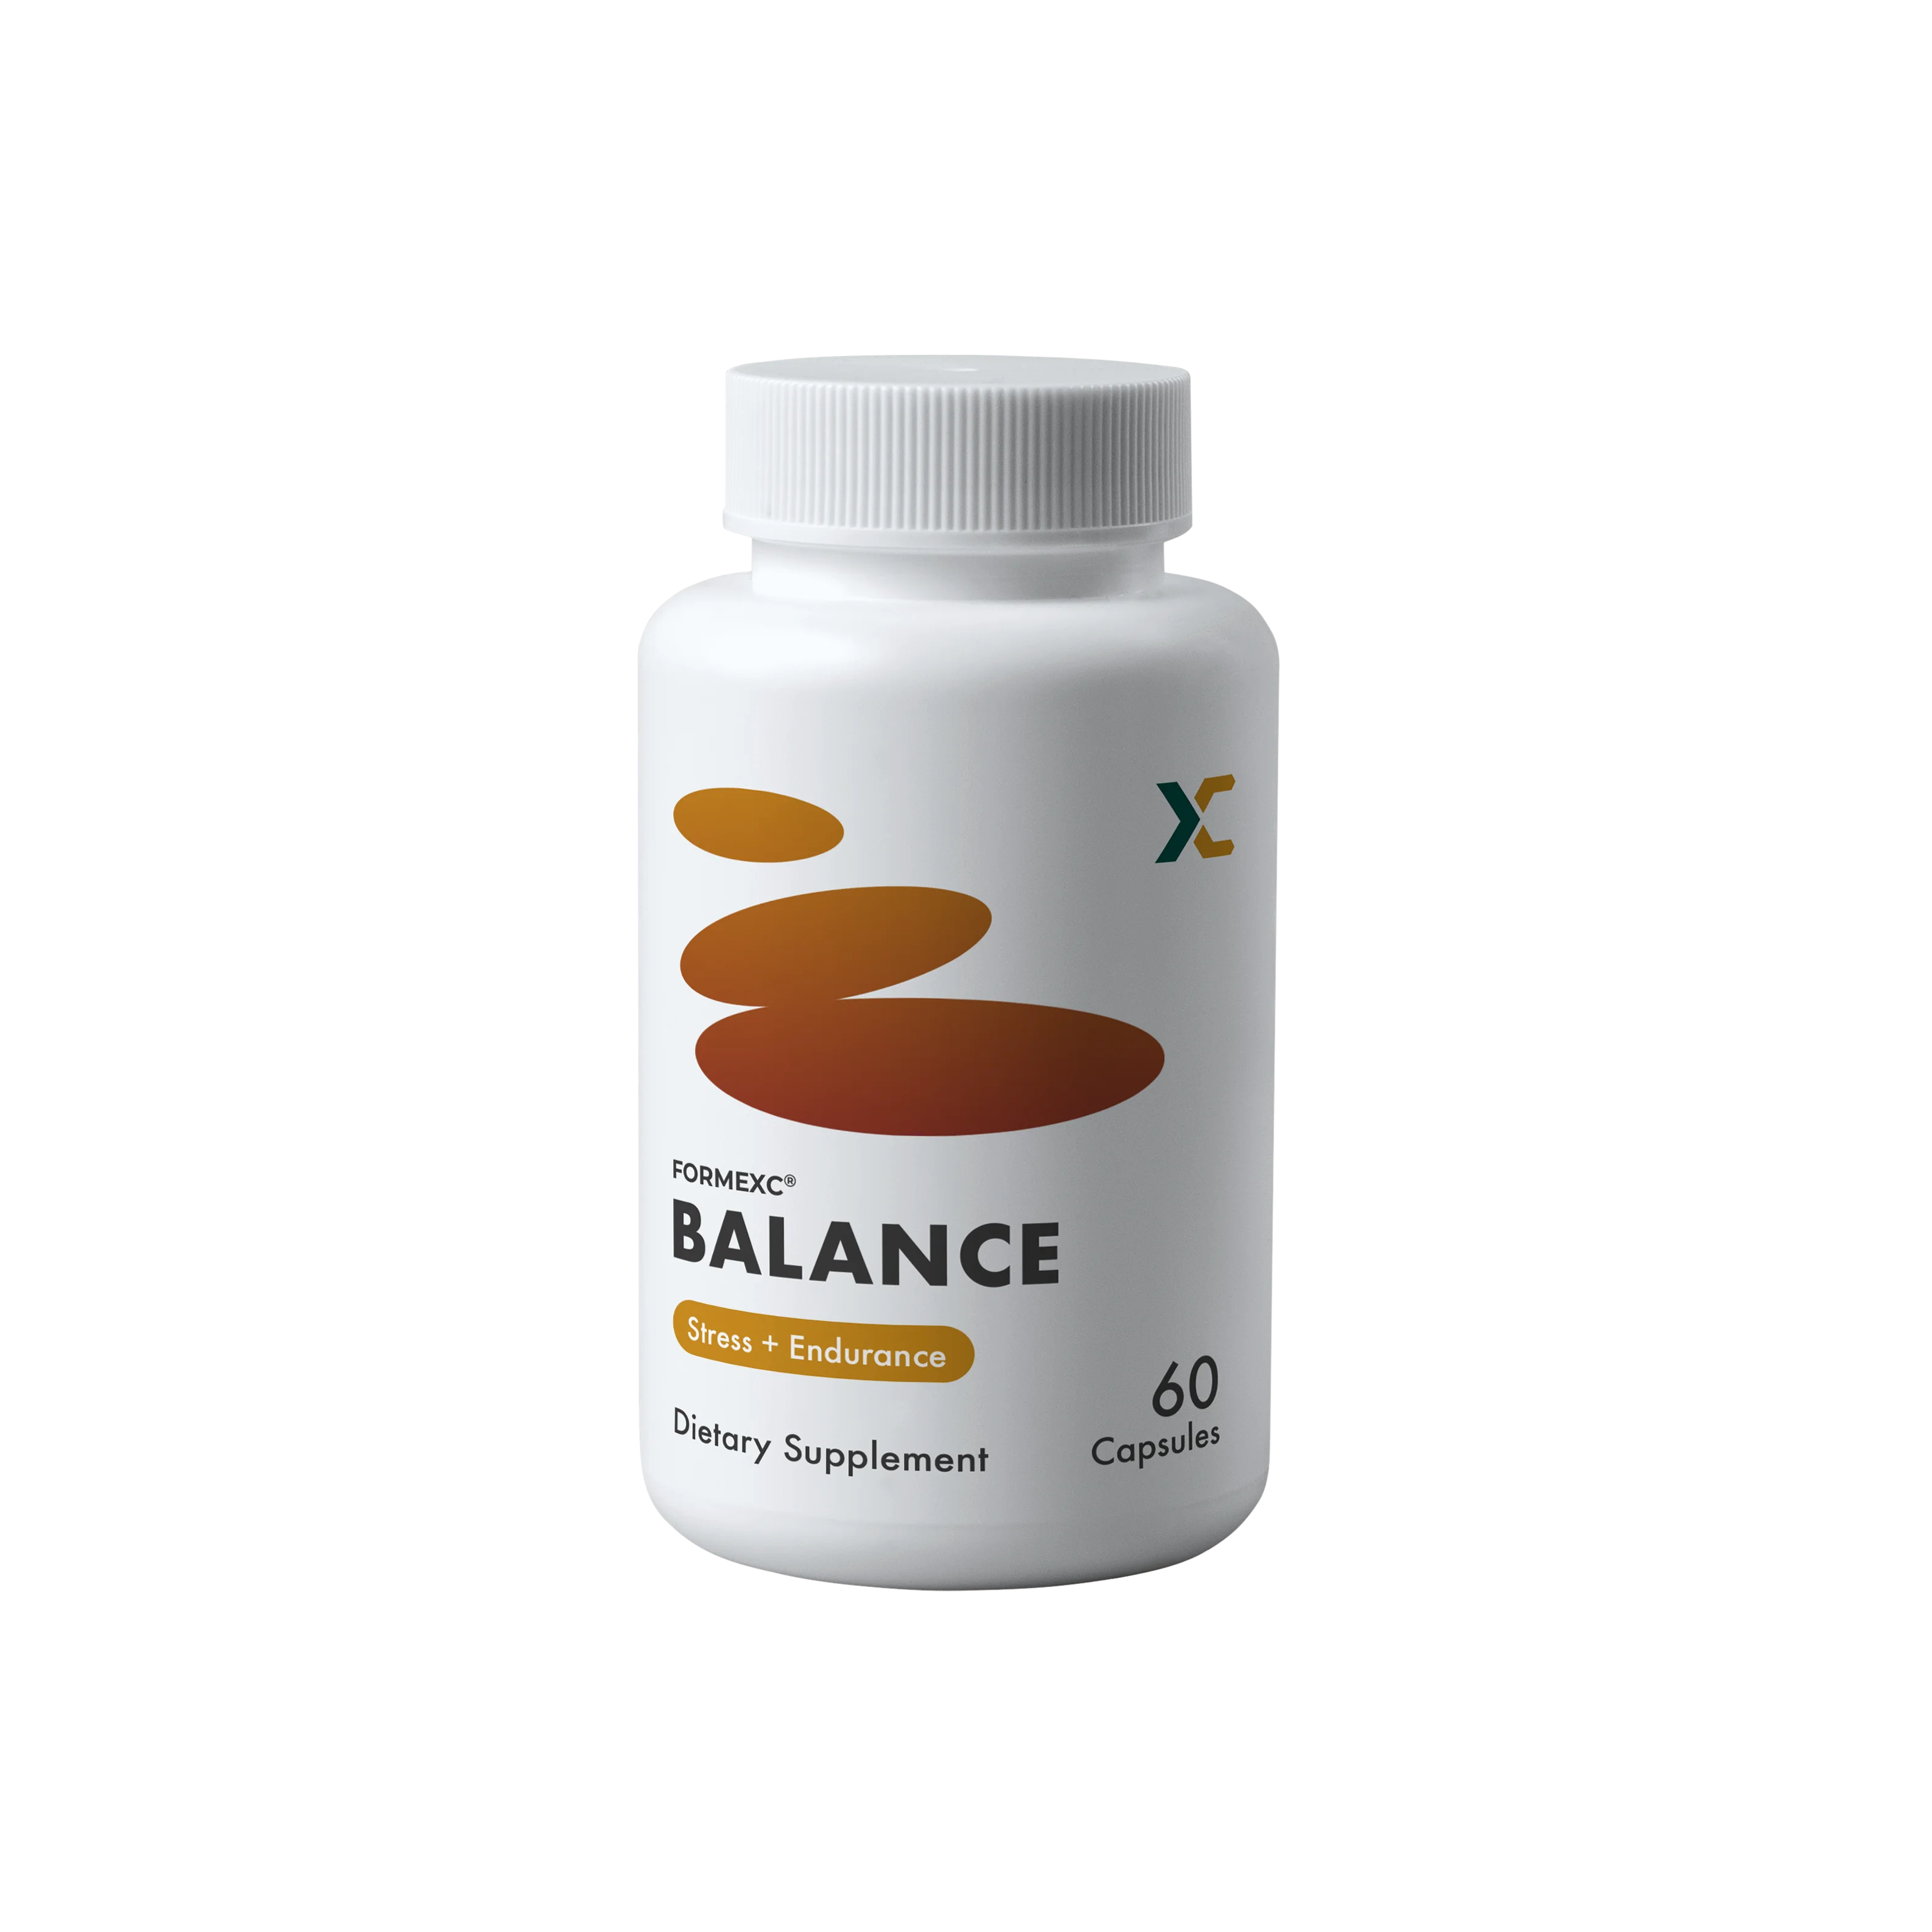 Formexc BALANCE is a natural supplement to help reduce stress, anxiety and fatigue.